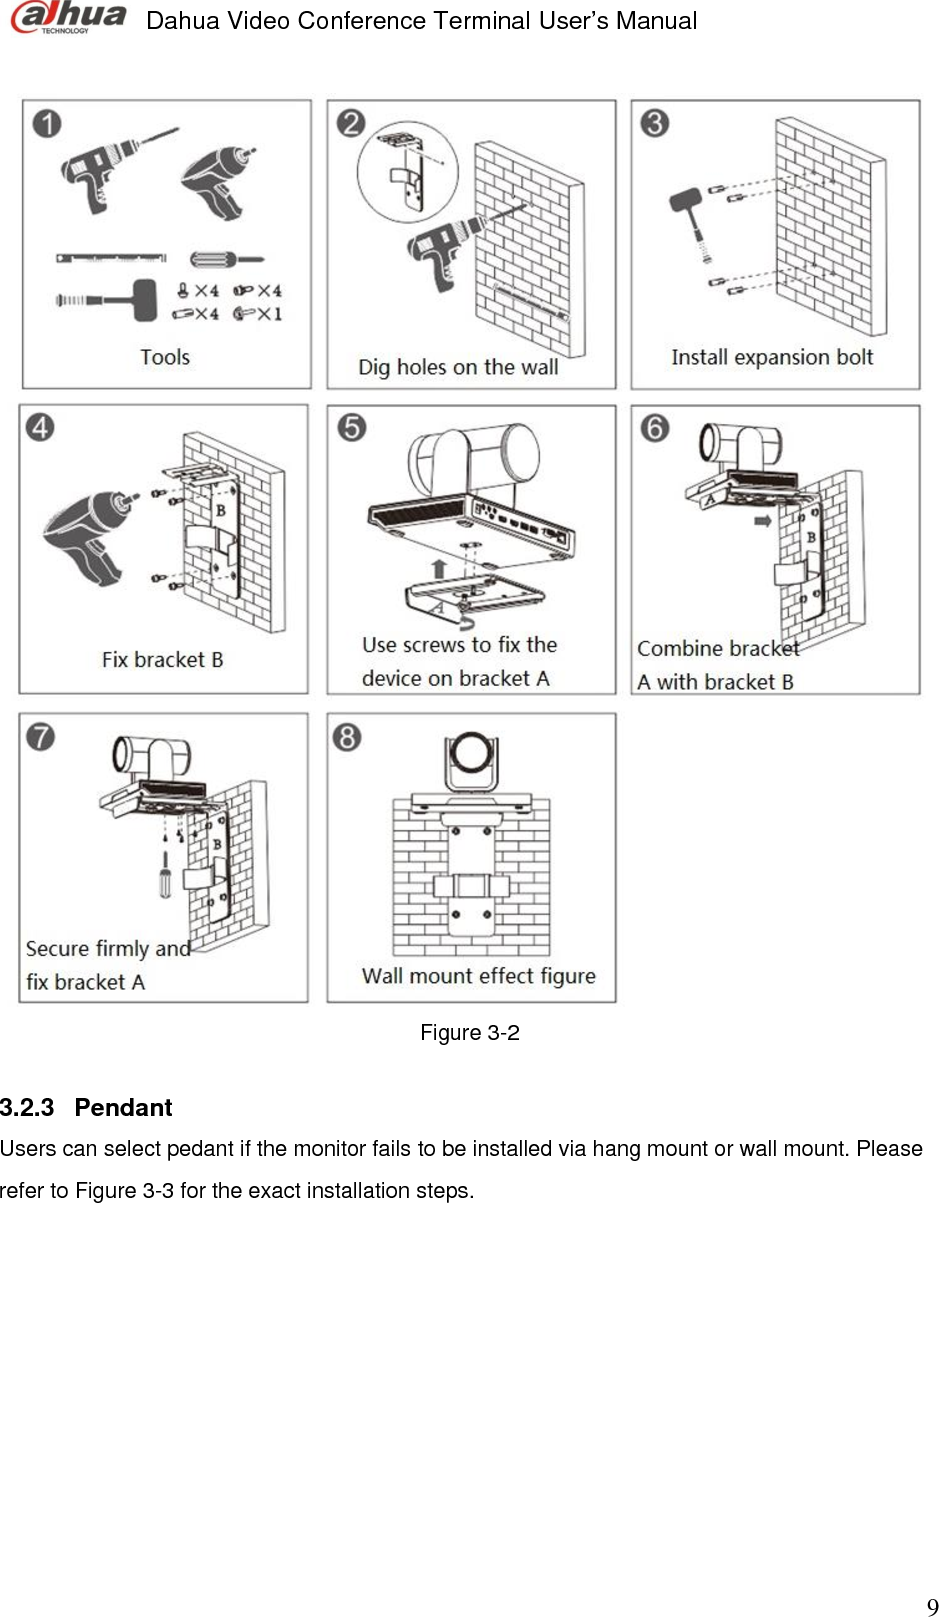  Dahua Video Conference Terminal User’s Manual                                                                              9 Figure 3-2  3.2.3  Pendant Users can select pedant if the monitor fails to be installed via hang mount or wall mount. Please refer to Figure 3-3 for the exact installation steps.         